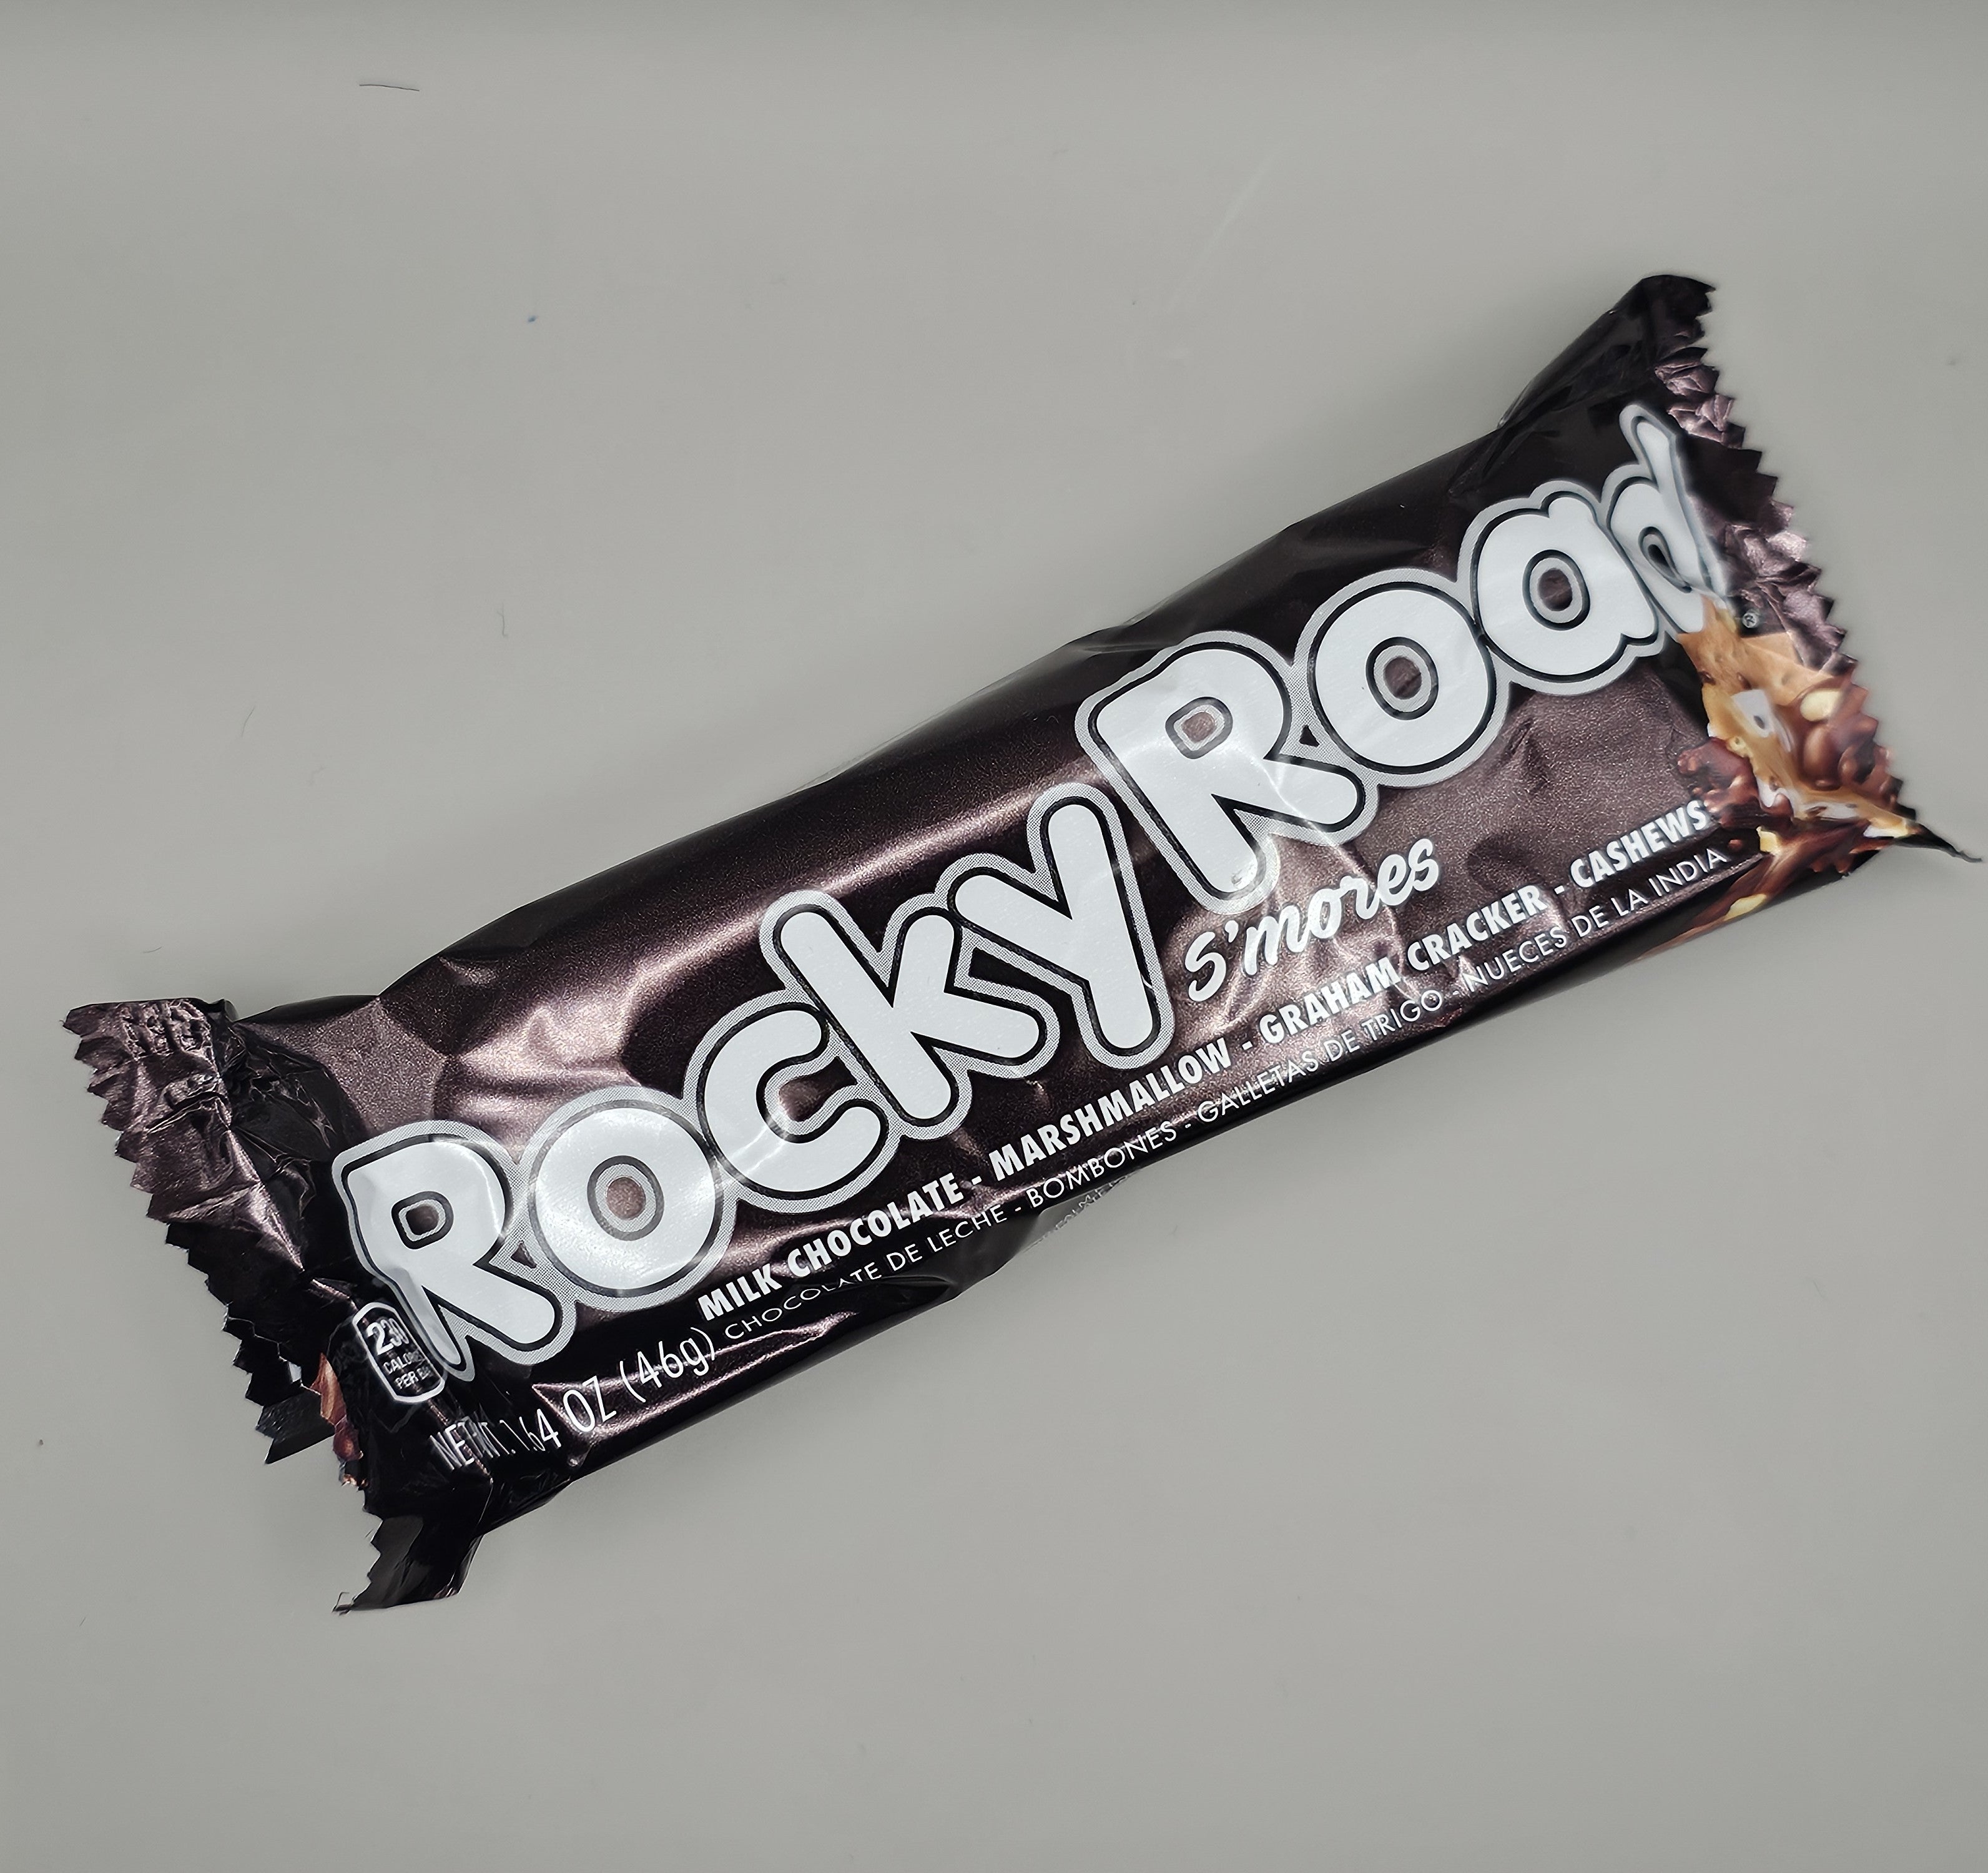 Rocky road s'mores